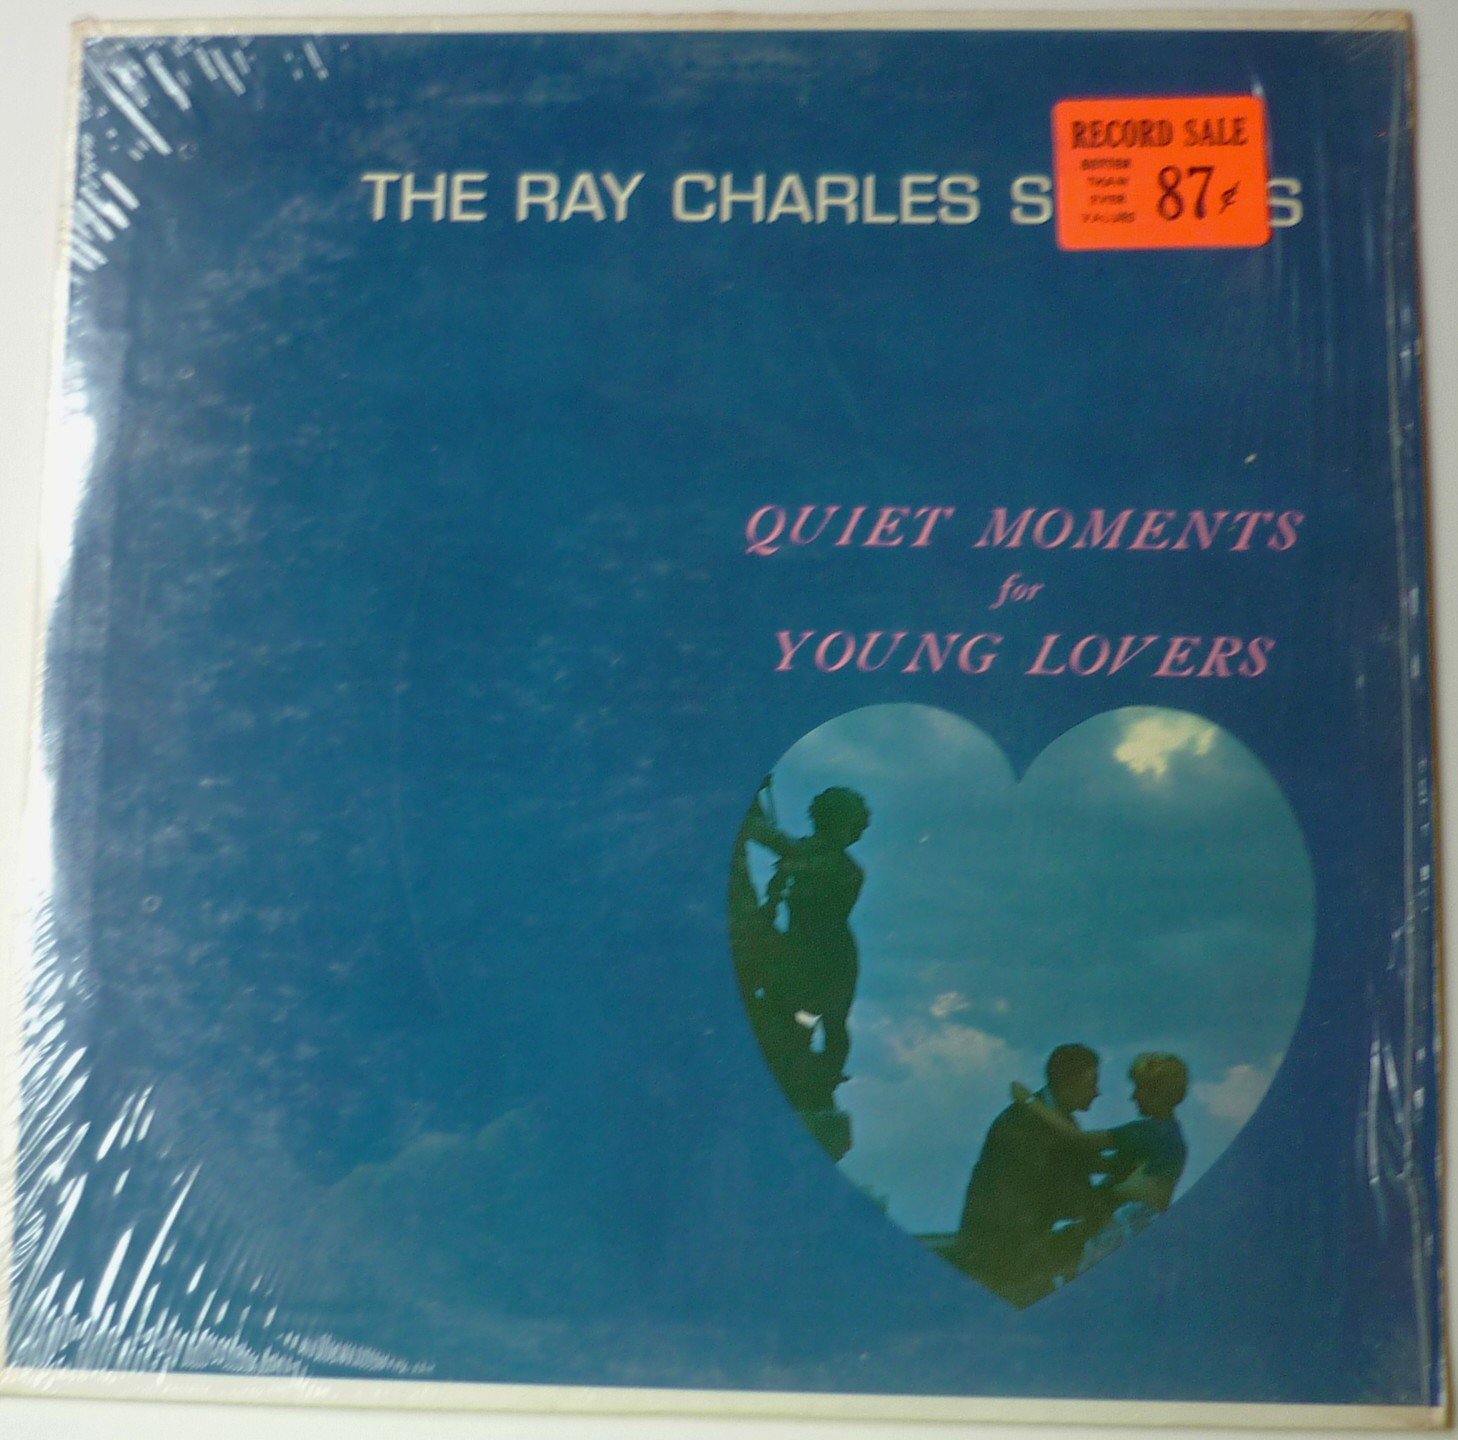 Quiet Moments for Young Lovers lp by The Ray Charles Singers